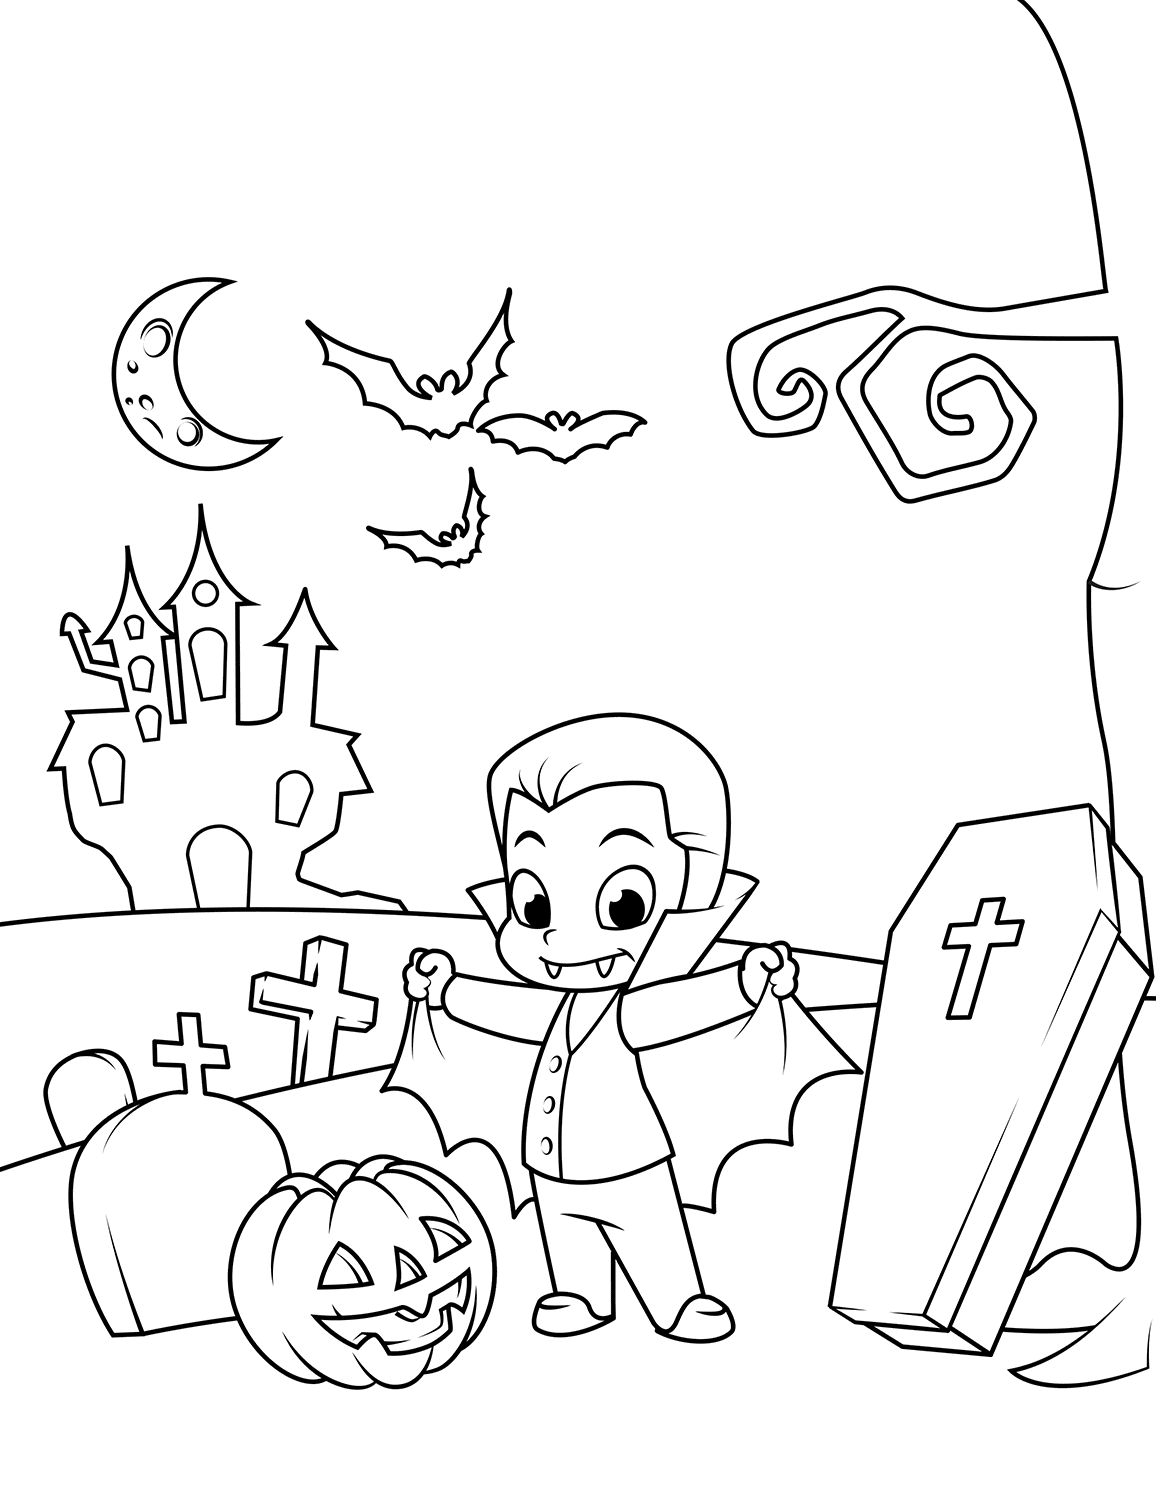 Cute Count Dracula In The Cemetery Halloween Coloring Page